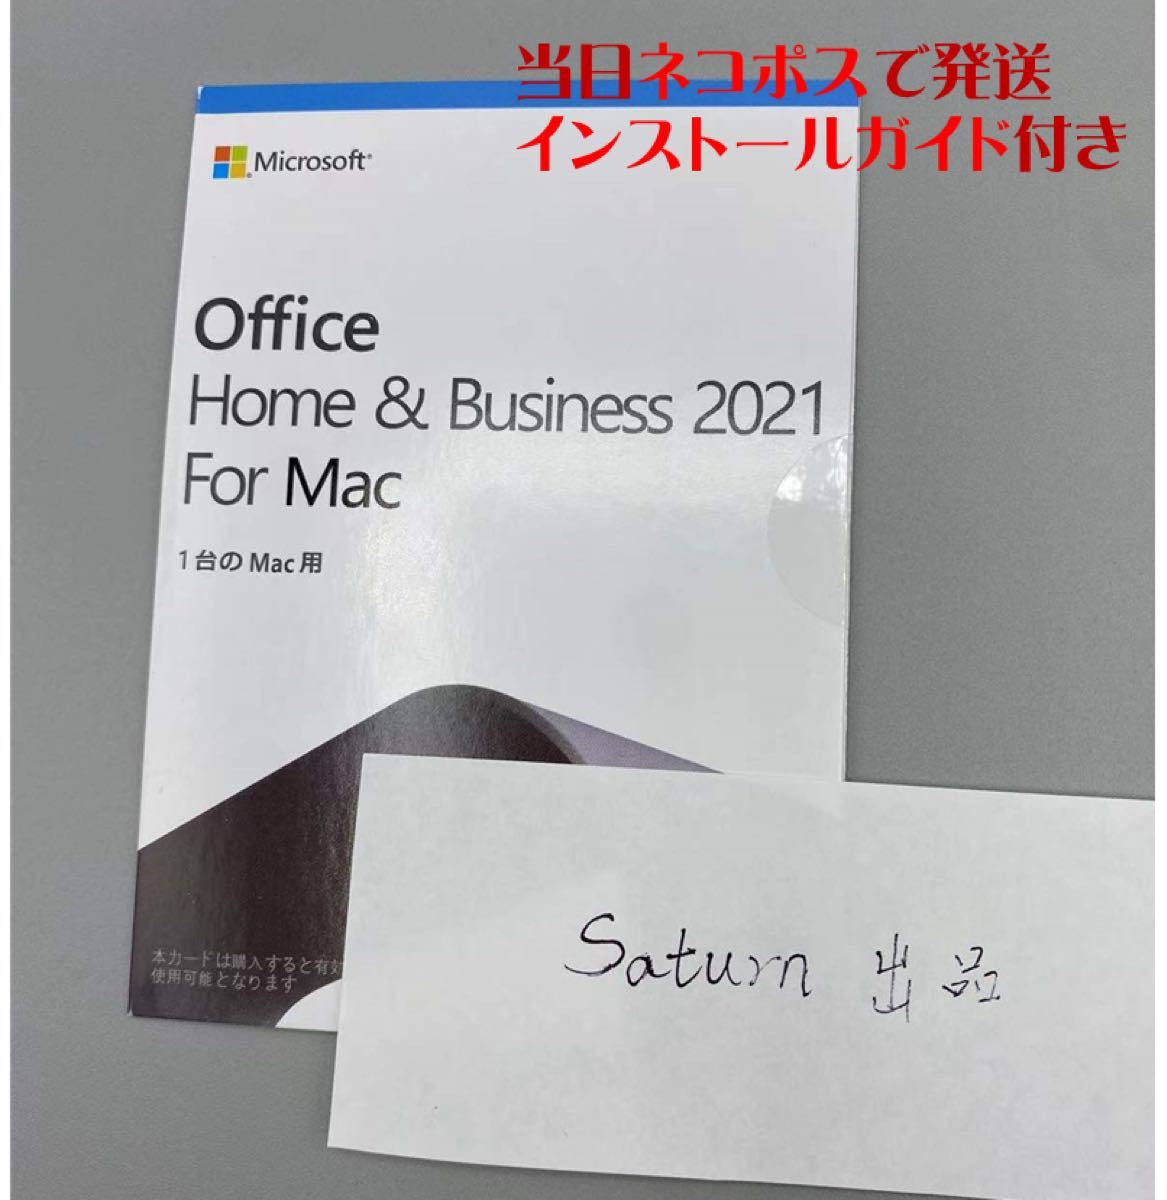 Microsoft Office 2021 Home and Business for Mac 1PCの認証